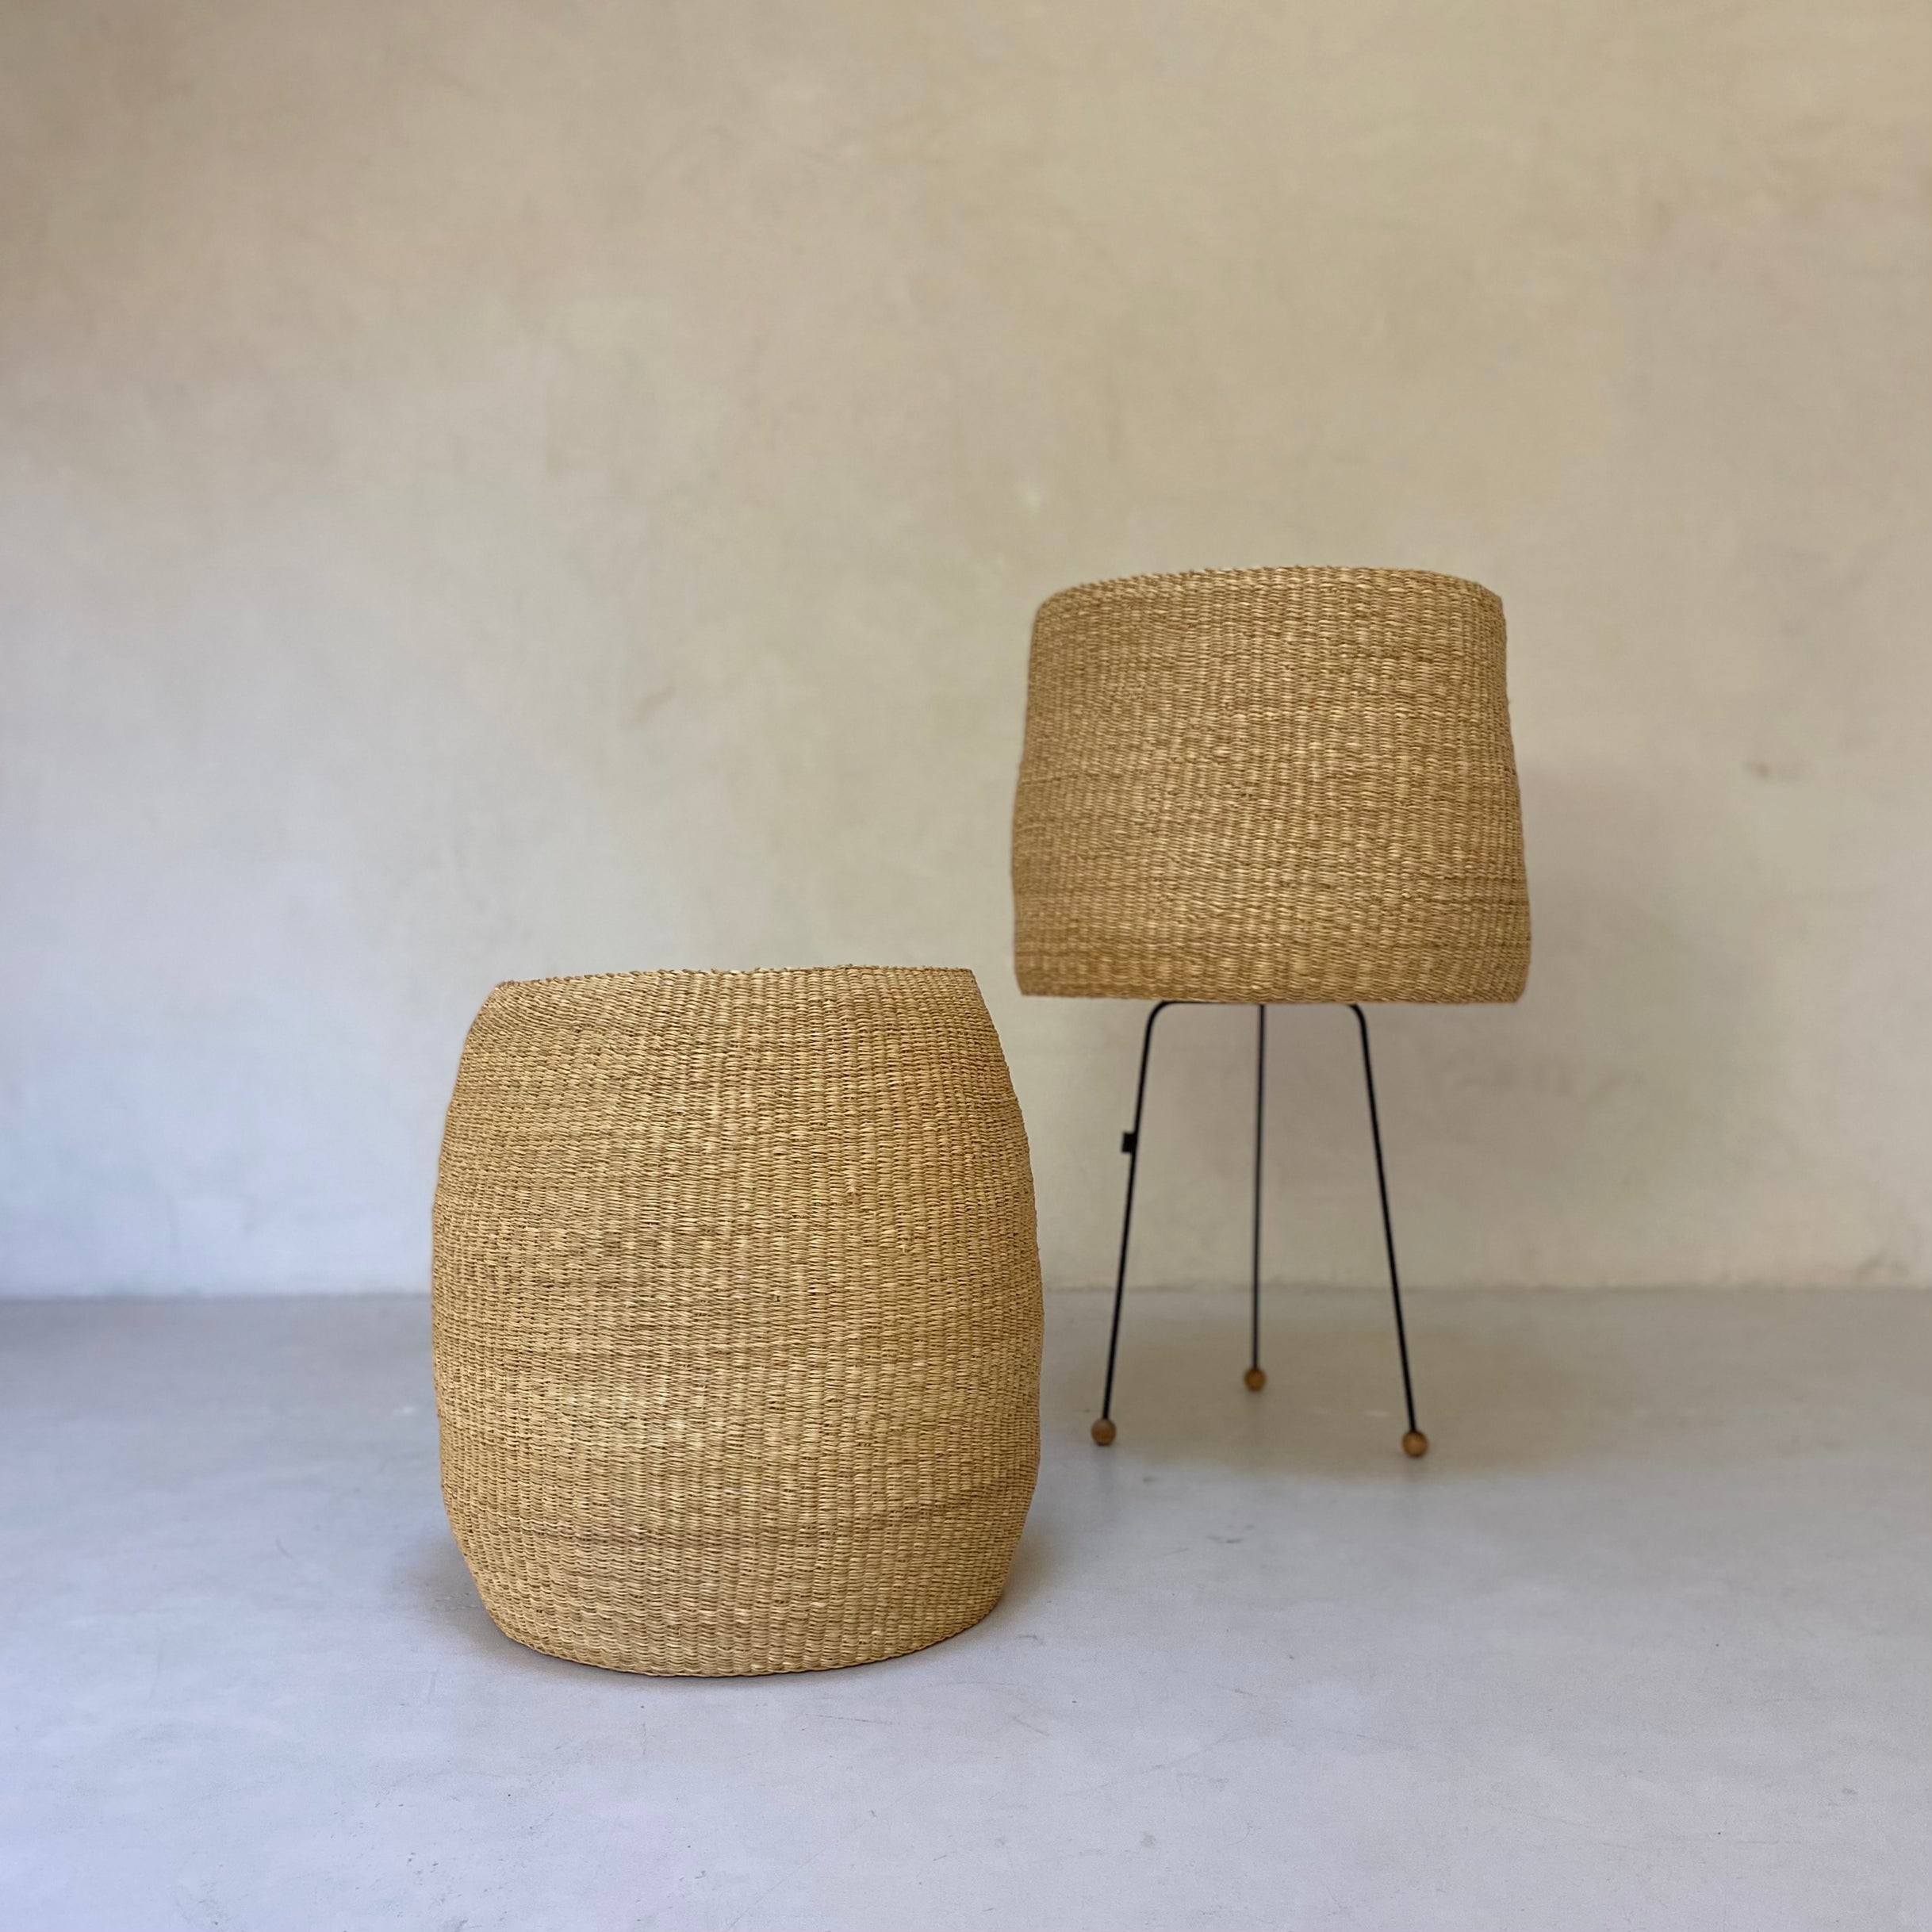 a pair of stools made out of straw